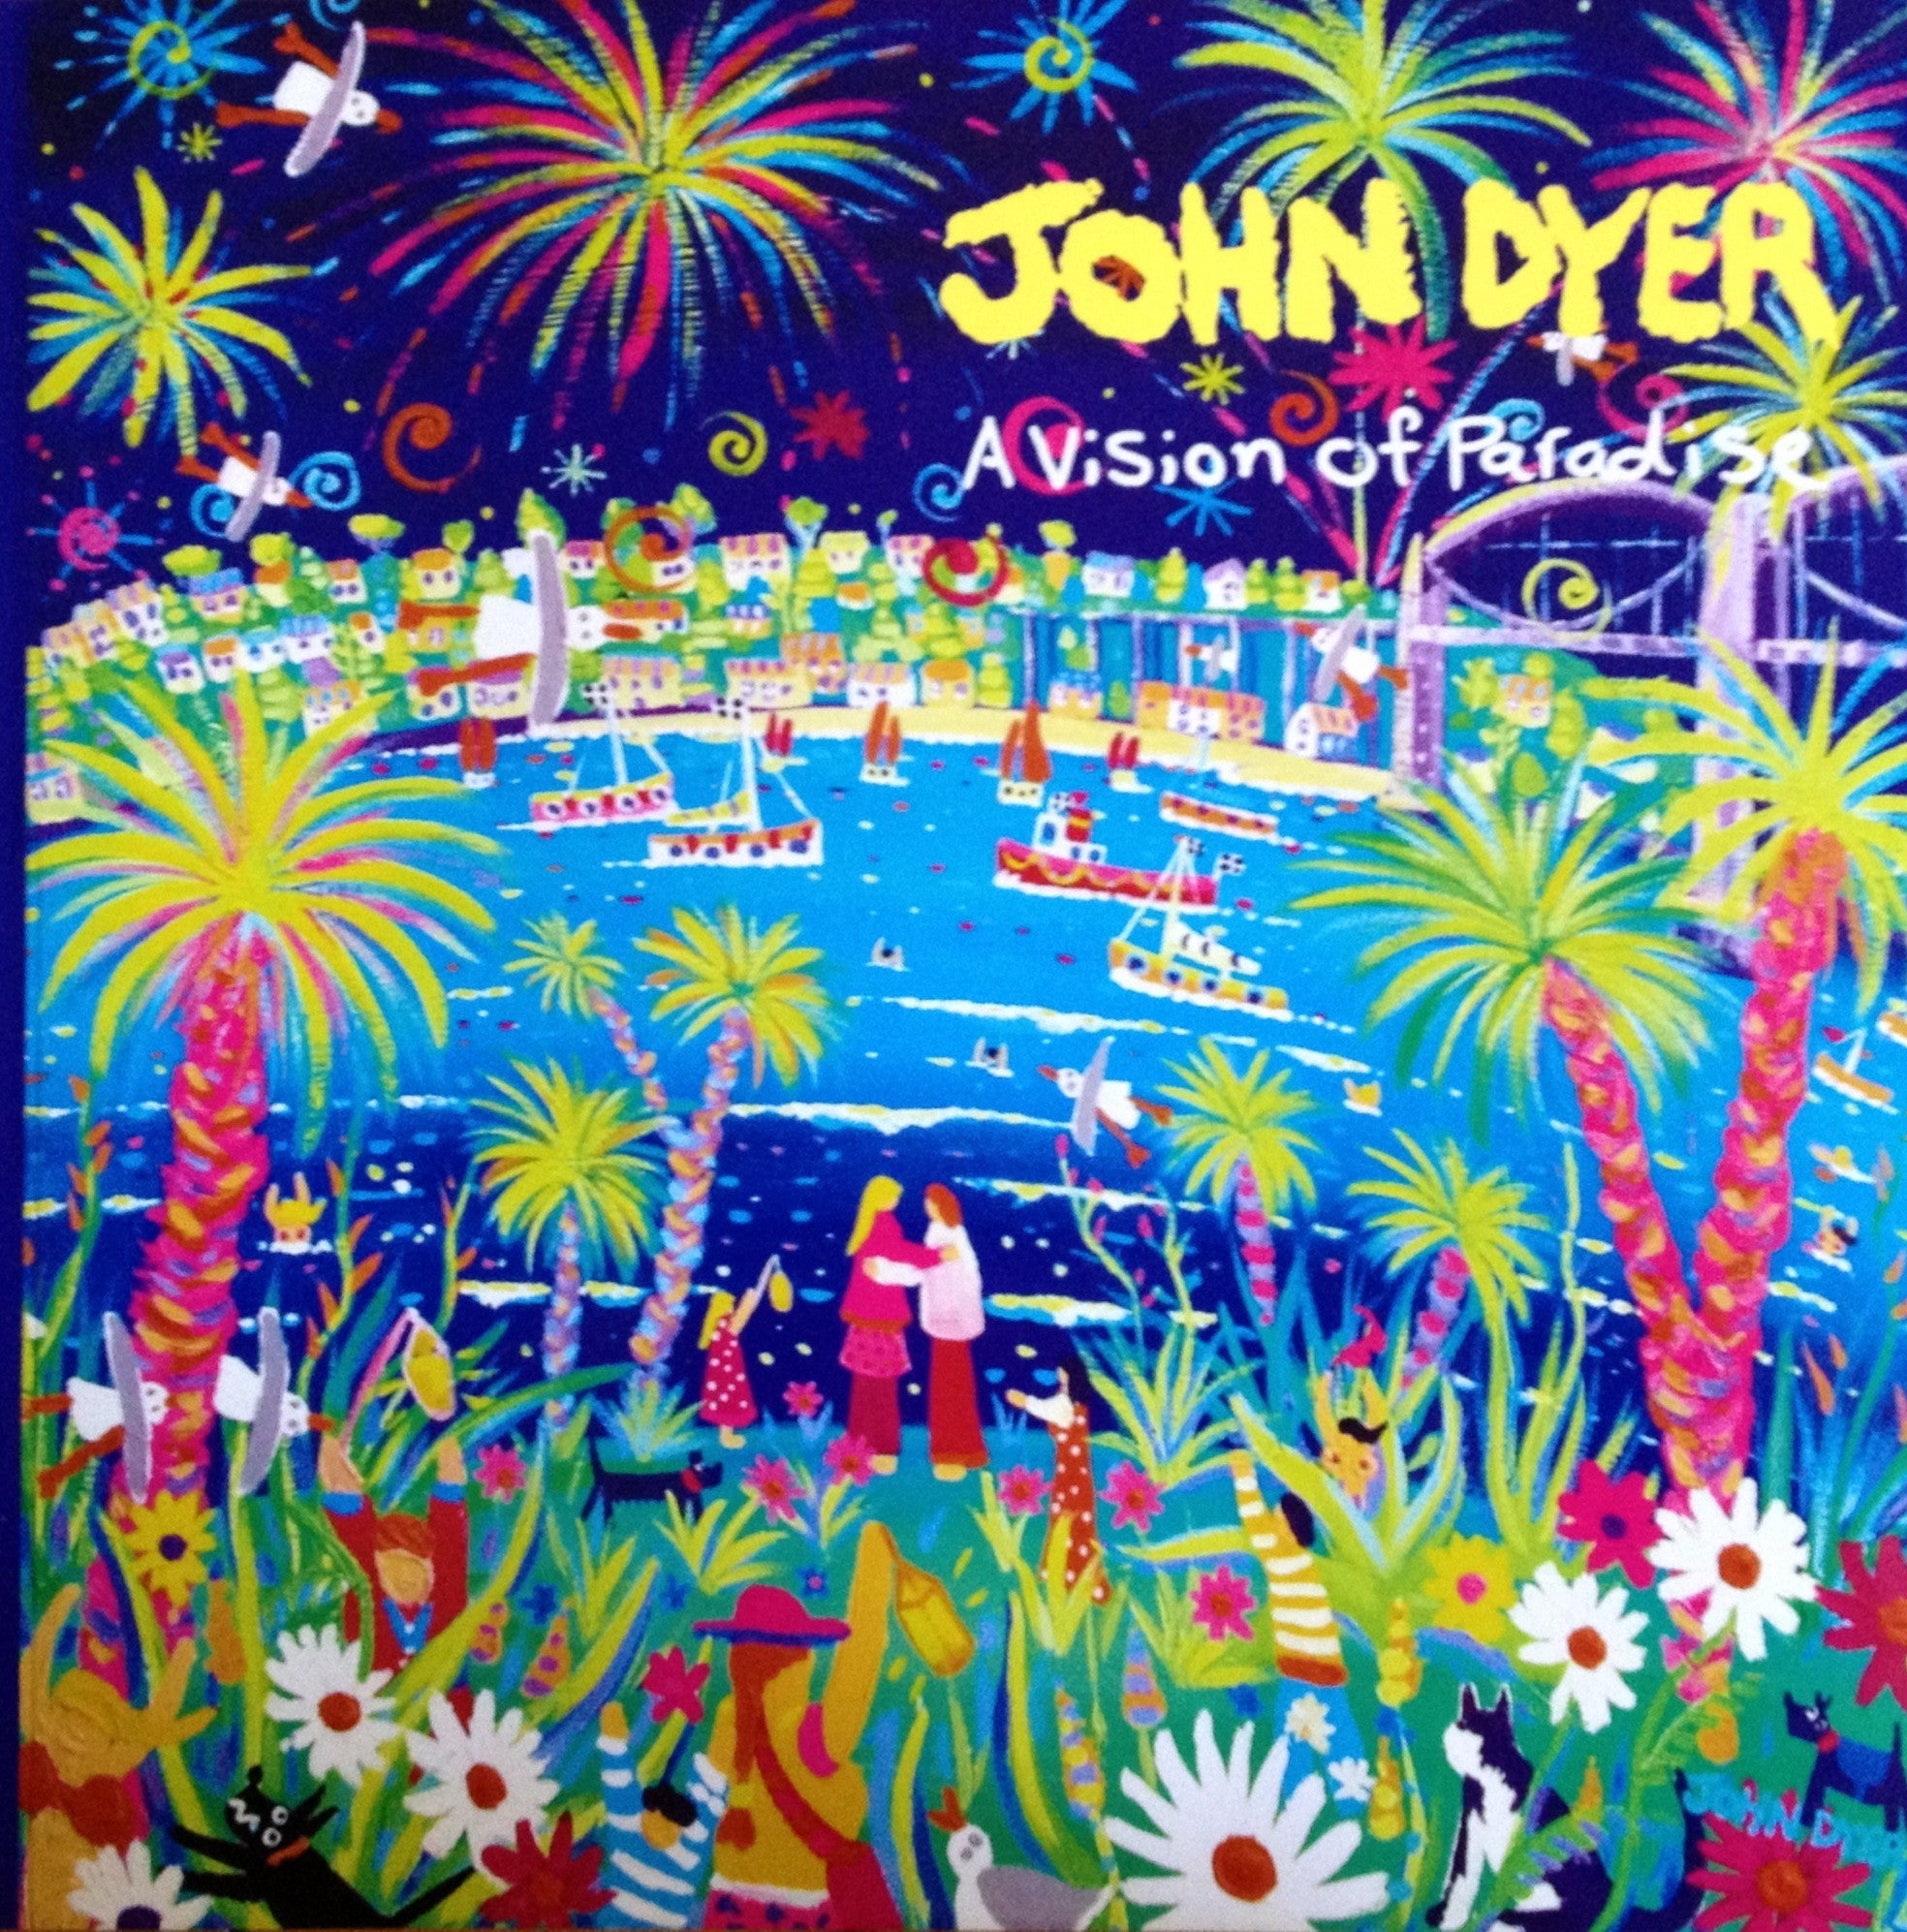 John Dyer, A Vision of Paradise Book